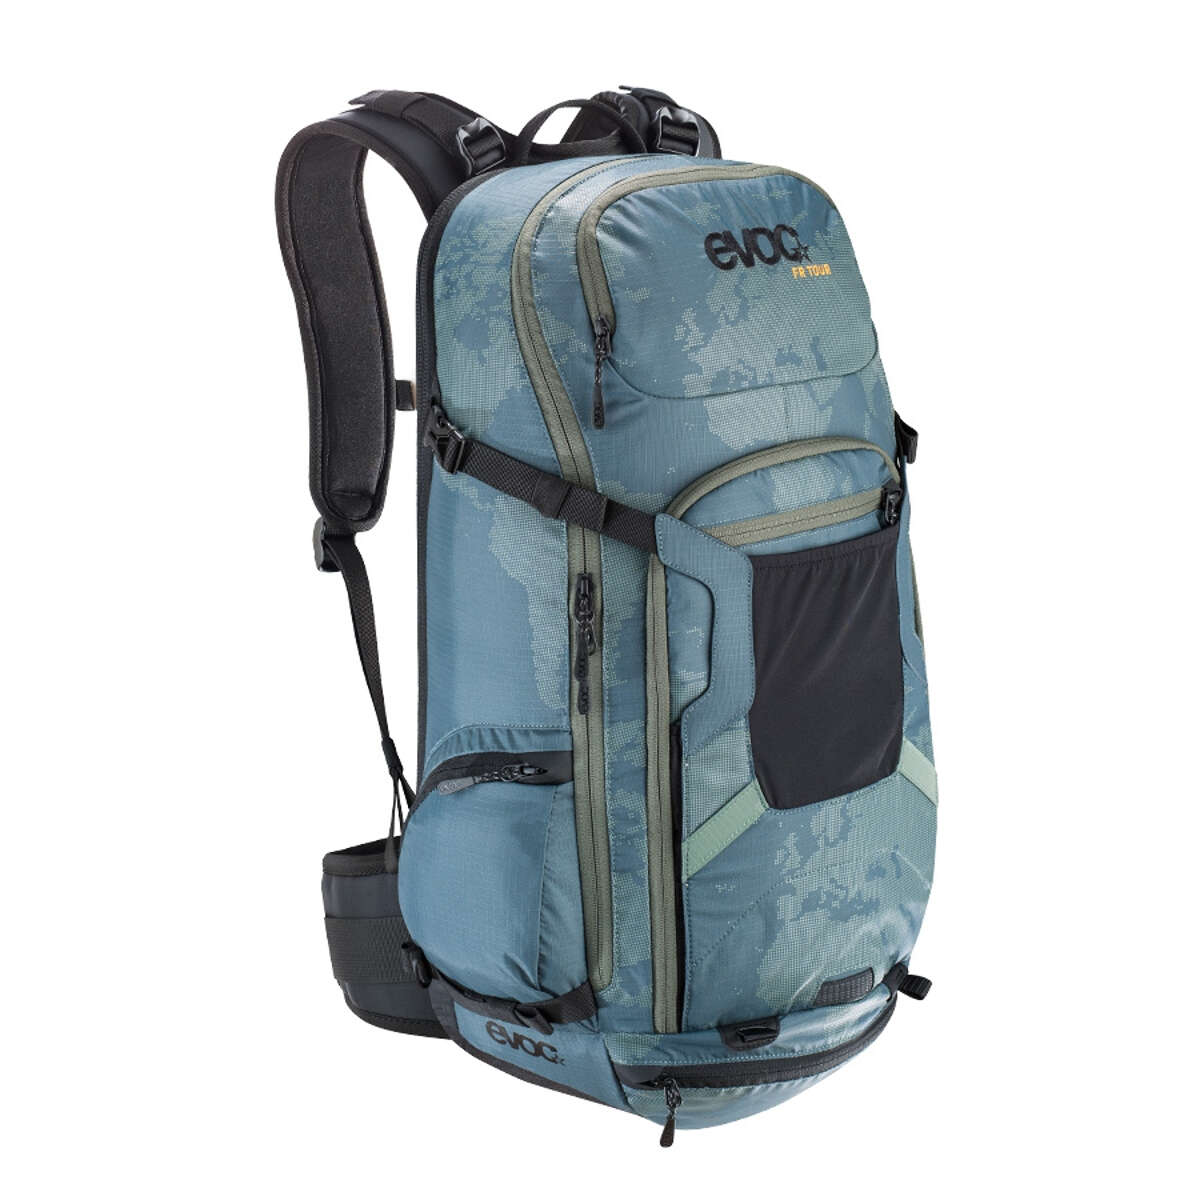 Evoc Protector Backpack with Hydration System Compartment FR Tour Slate, 30 Liter